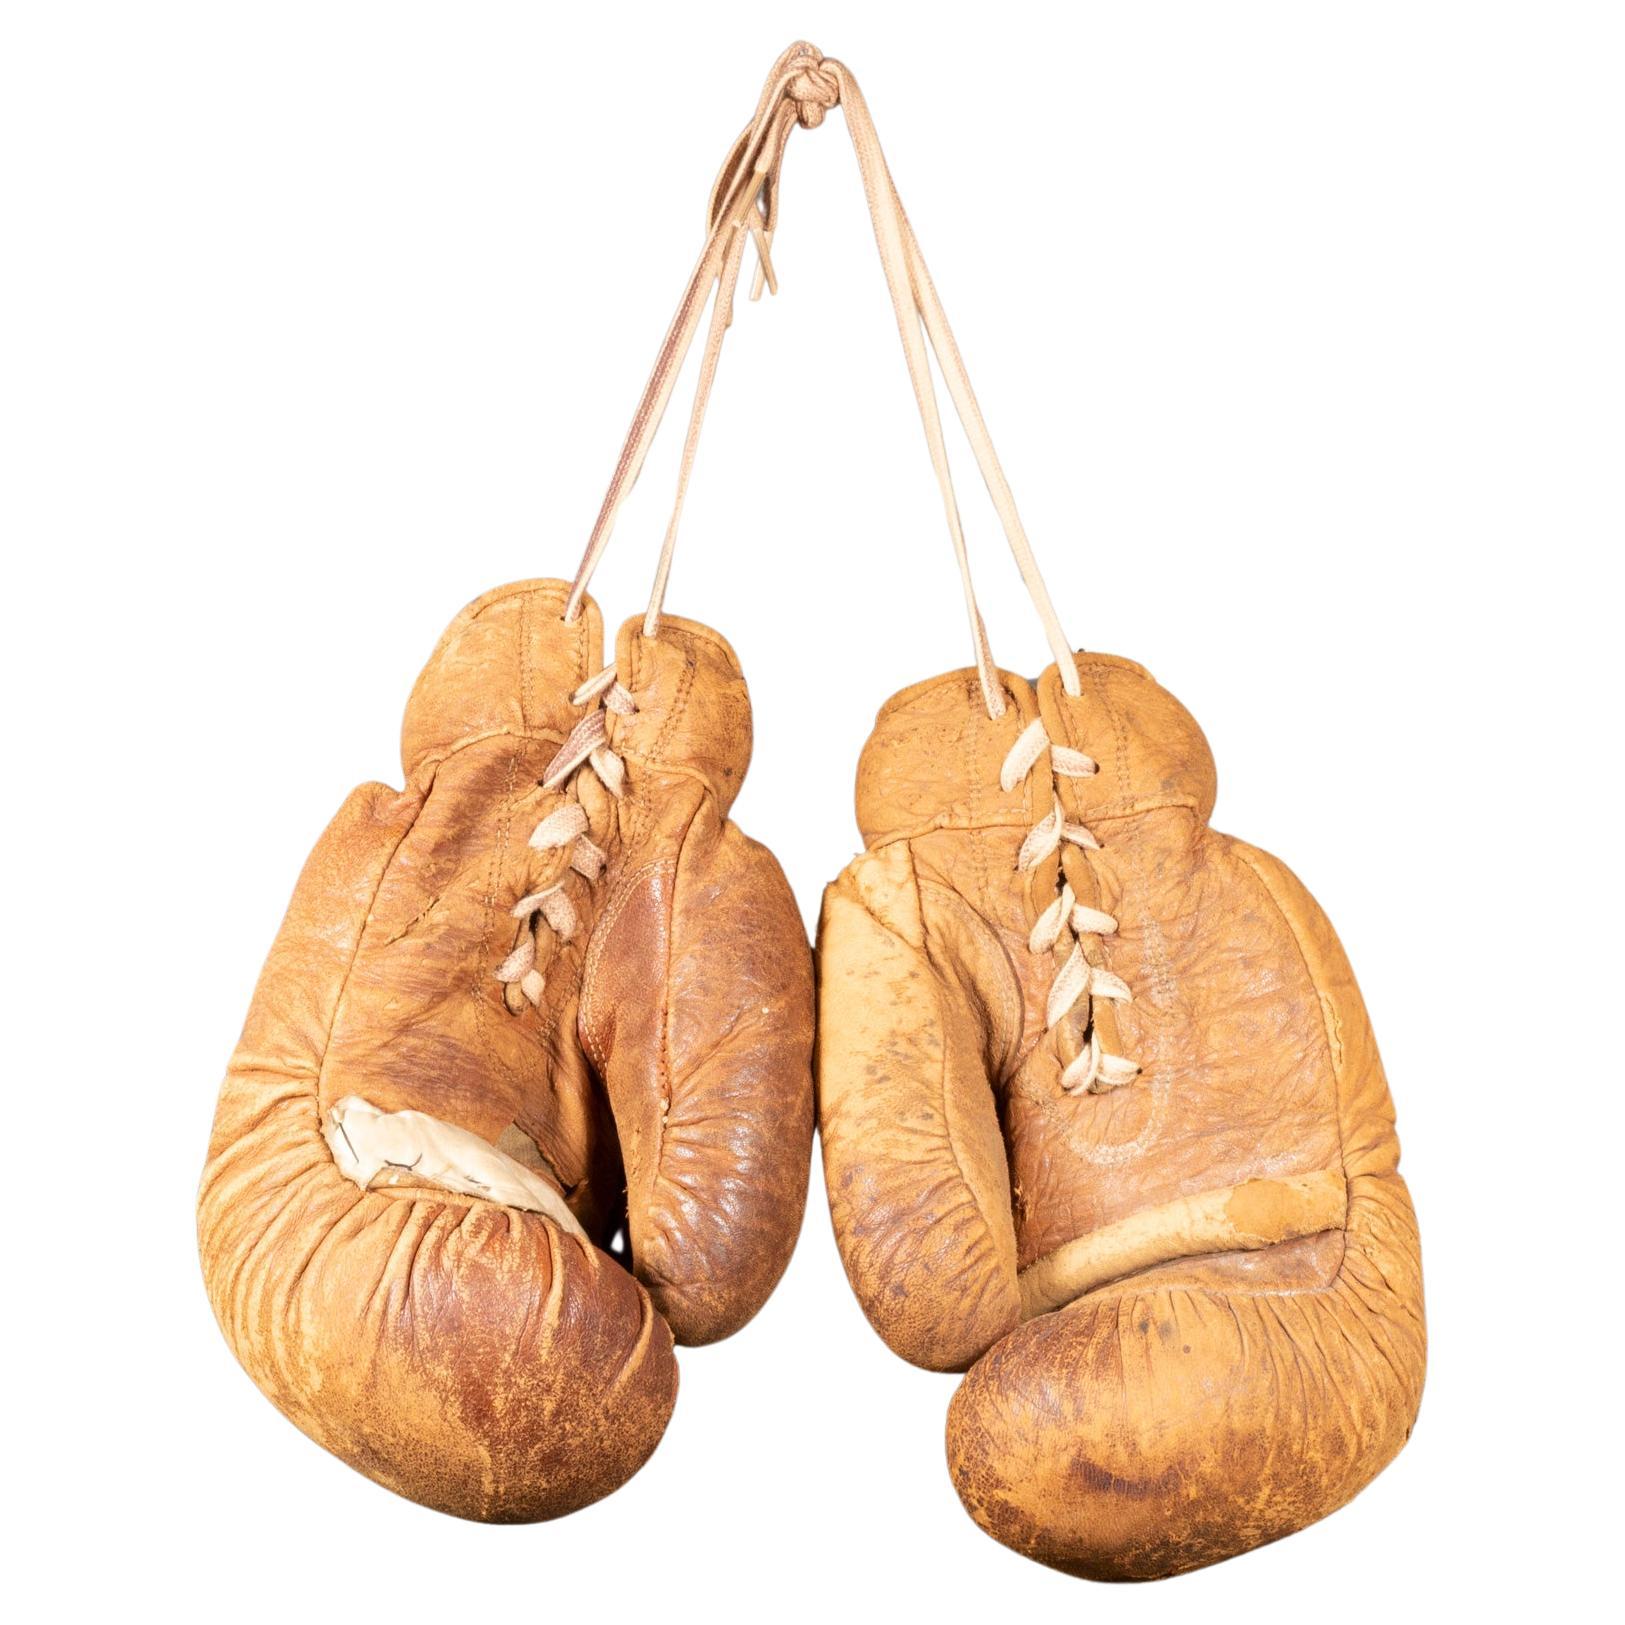 Vintage Leather and Horse Hair Boxing Gloves c.1950-1960 (FREE SHIPPING)